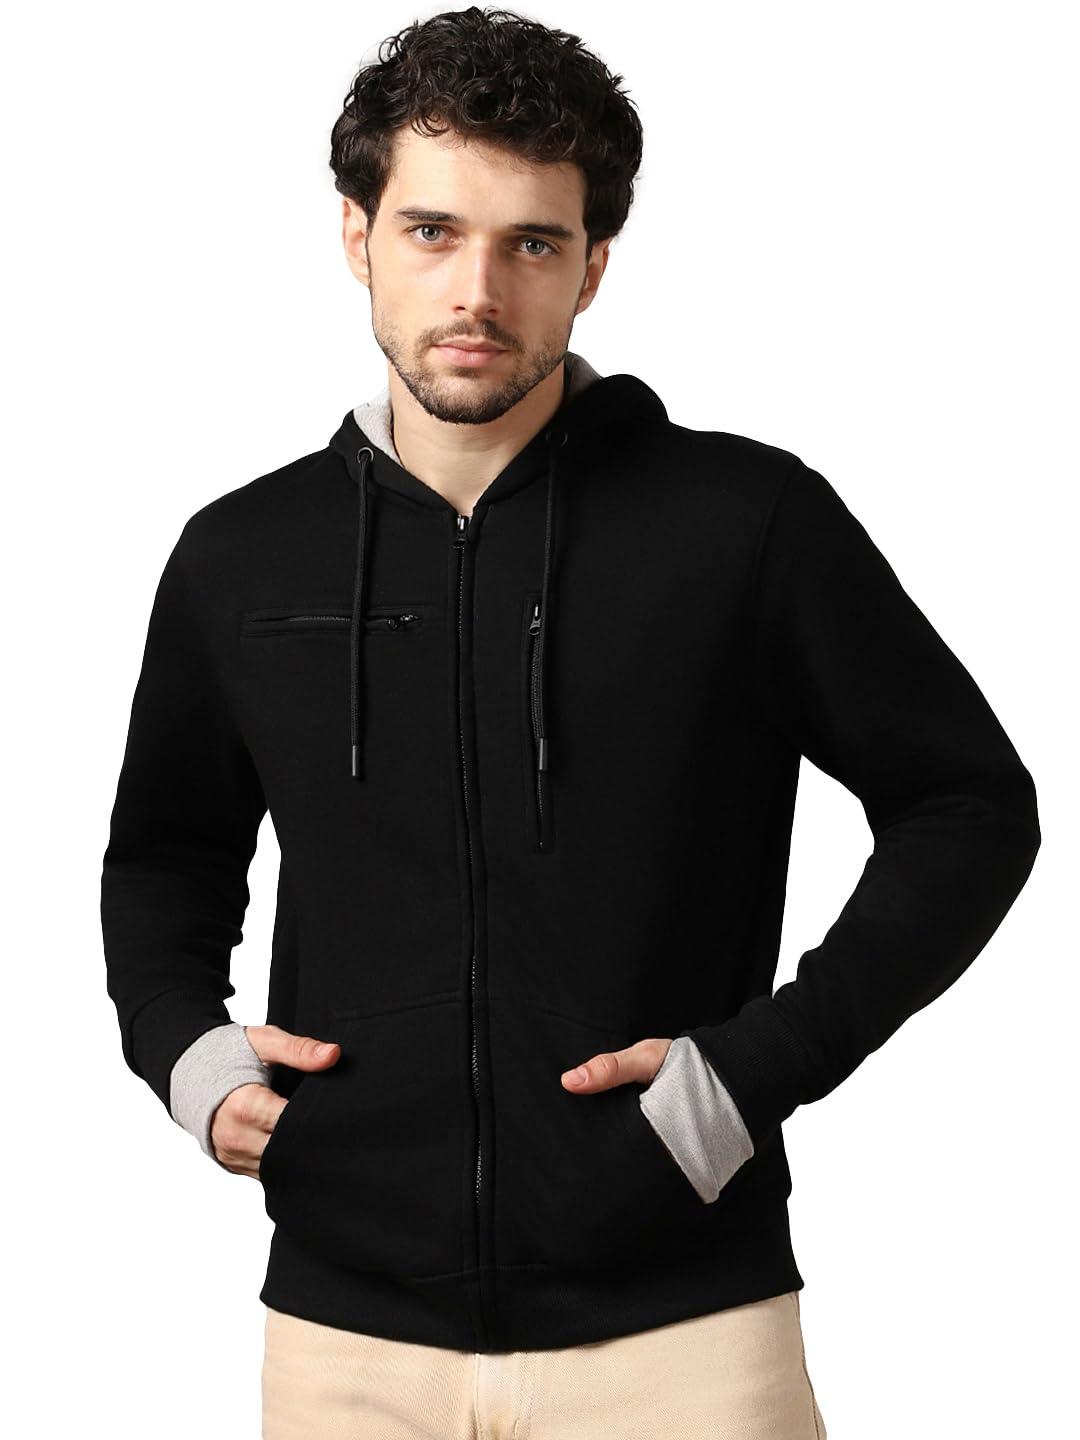 NOBERO Men's Travel Cotton Solid Plain Hoody Sports Winter Gym Workout Running Travel Trekking Hooded Sweatshirts and Hoodies for Men Boys Cotton Winter Casual Wear